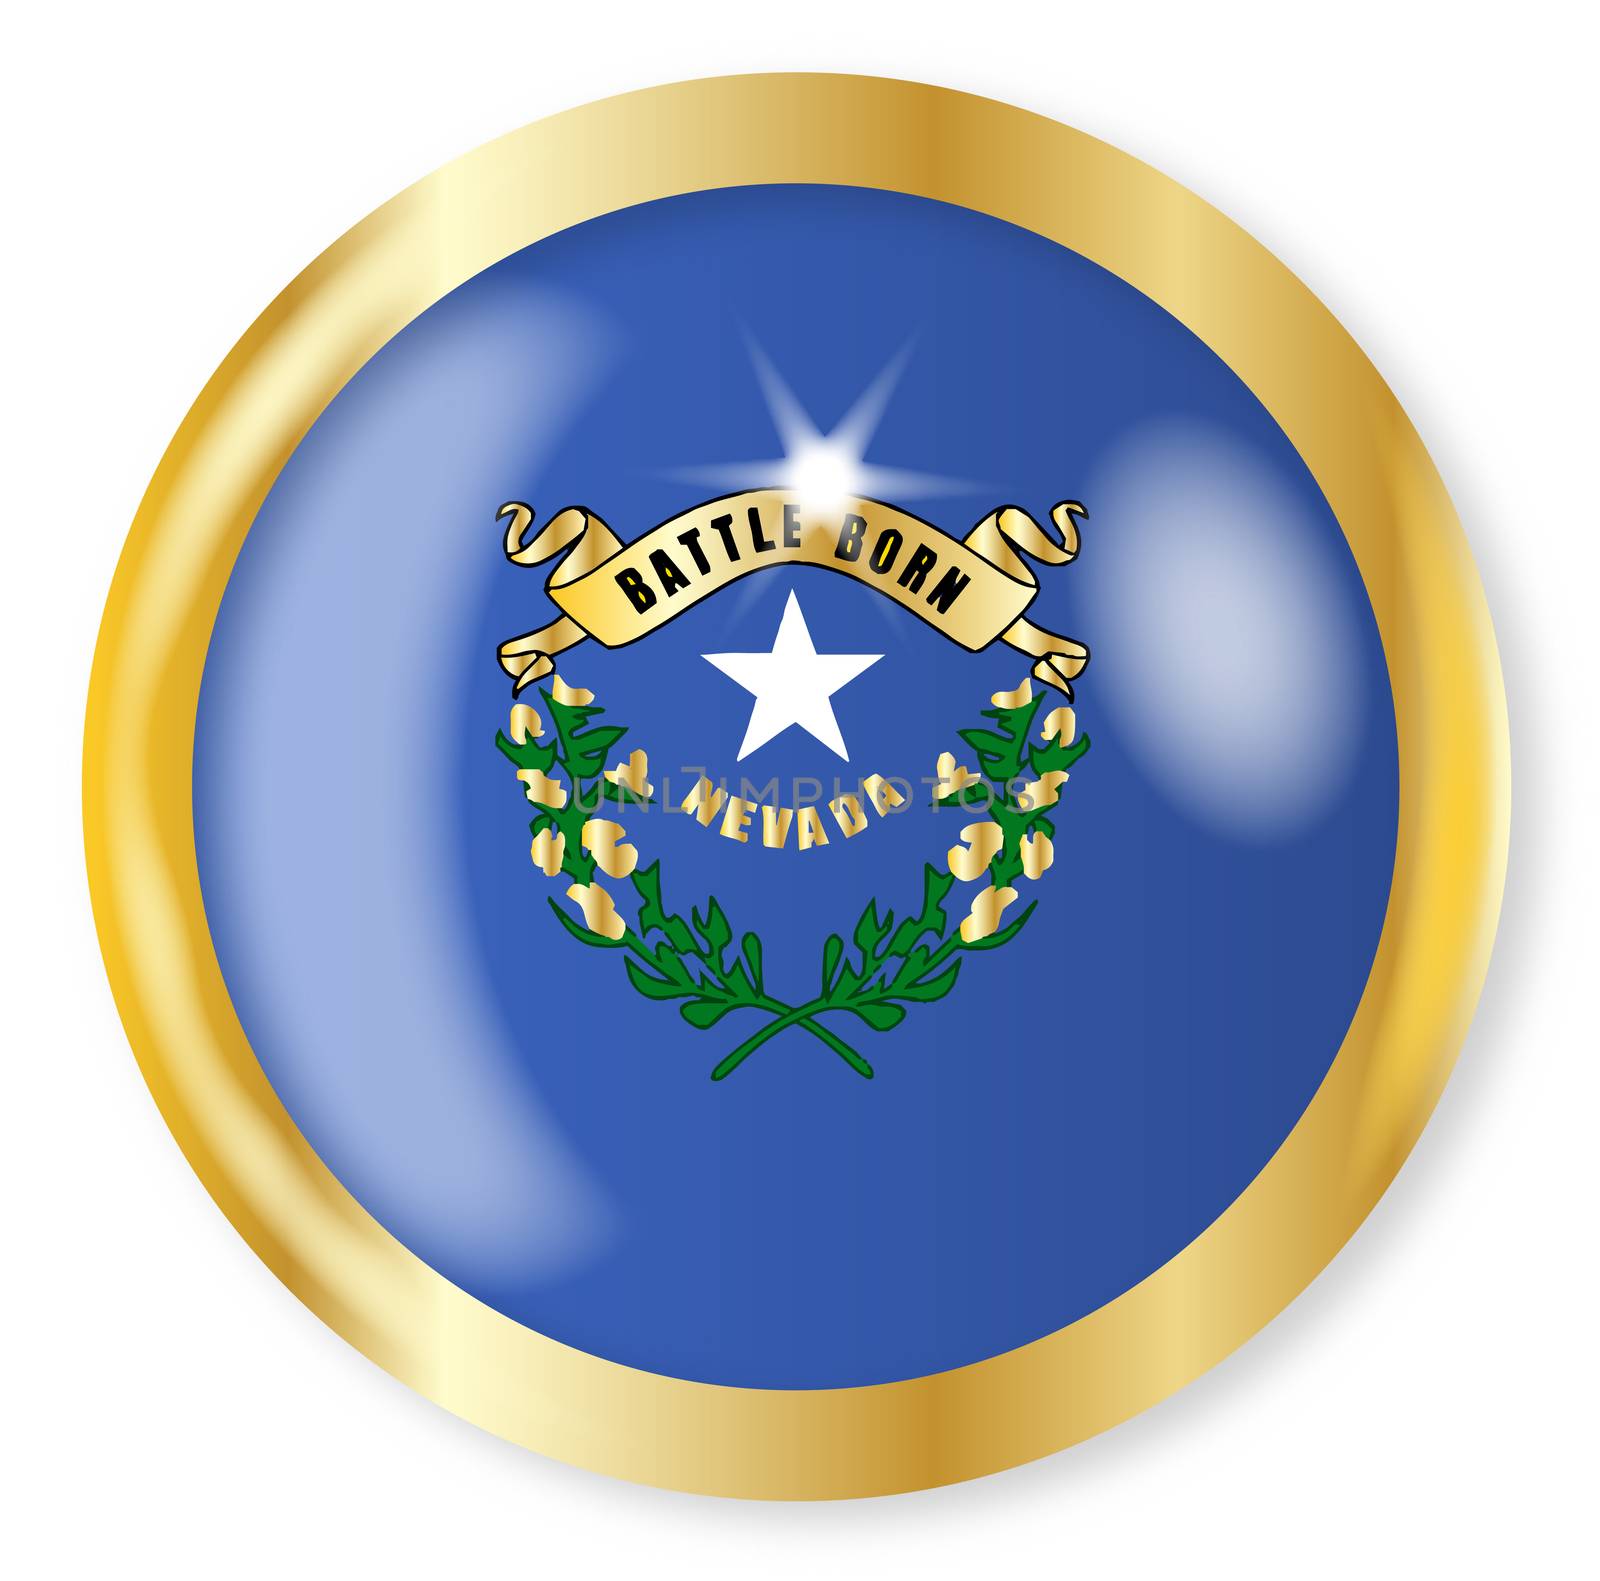 Nevada state flag button with a gold metal circular border over a white background